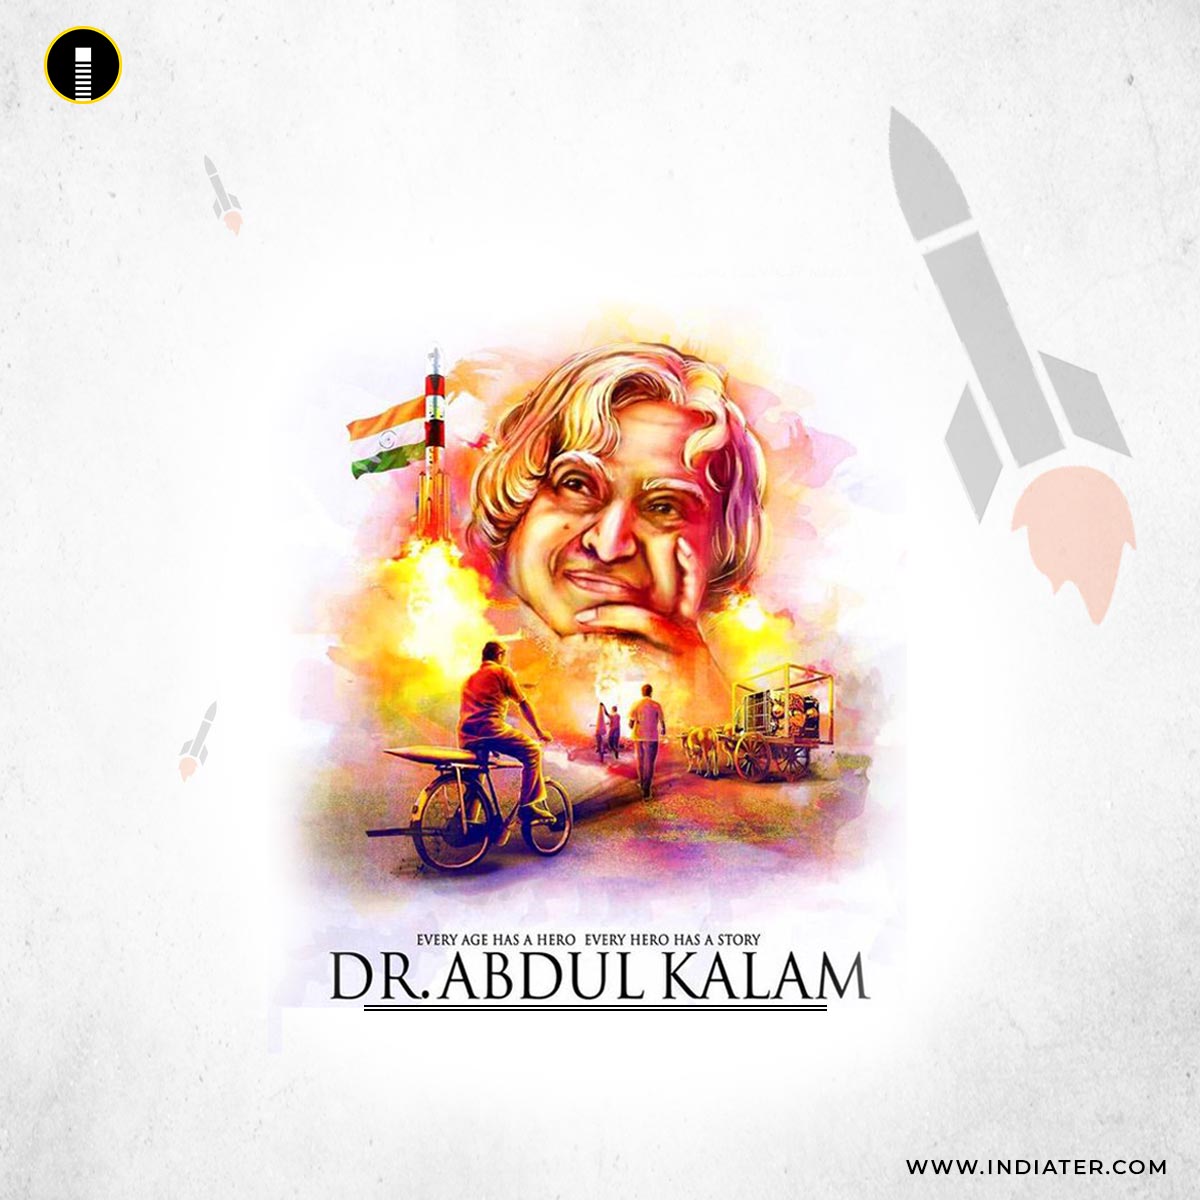 Free Banner for India wishes Happy Birthday APJ Abdul Kalam PSD ...